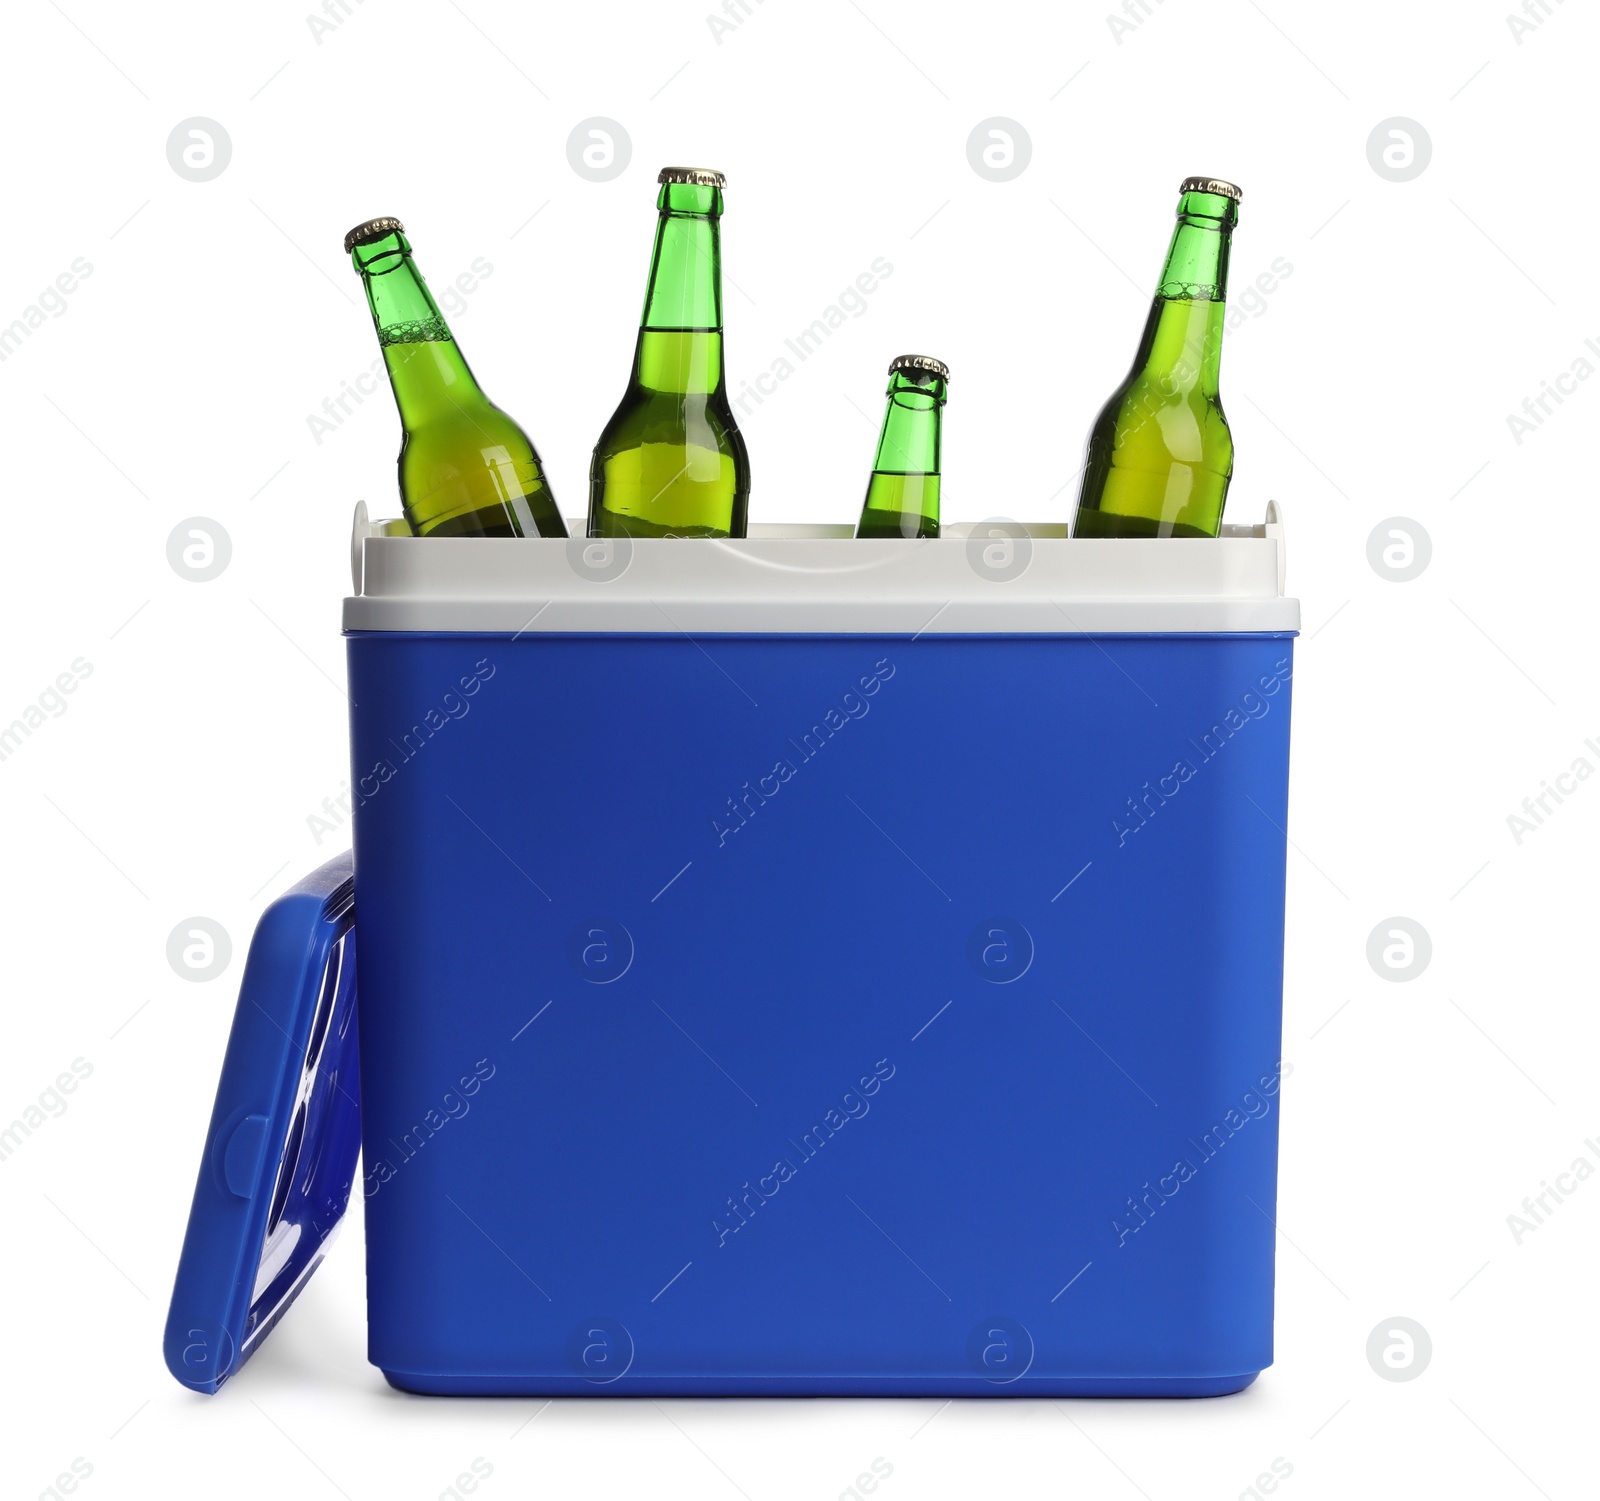 Photo of Blue plastic cool box with bottles isolated on white